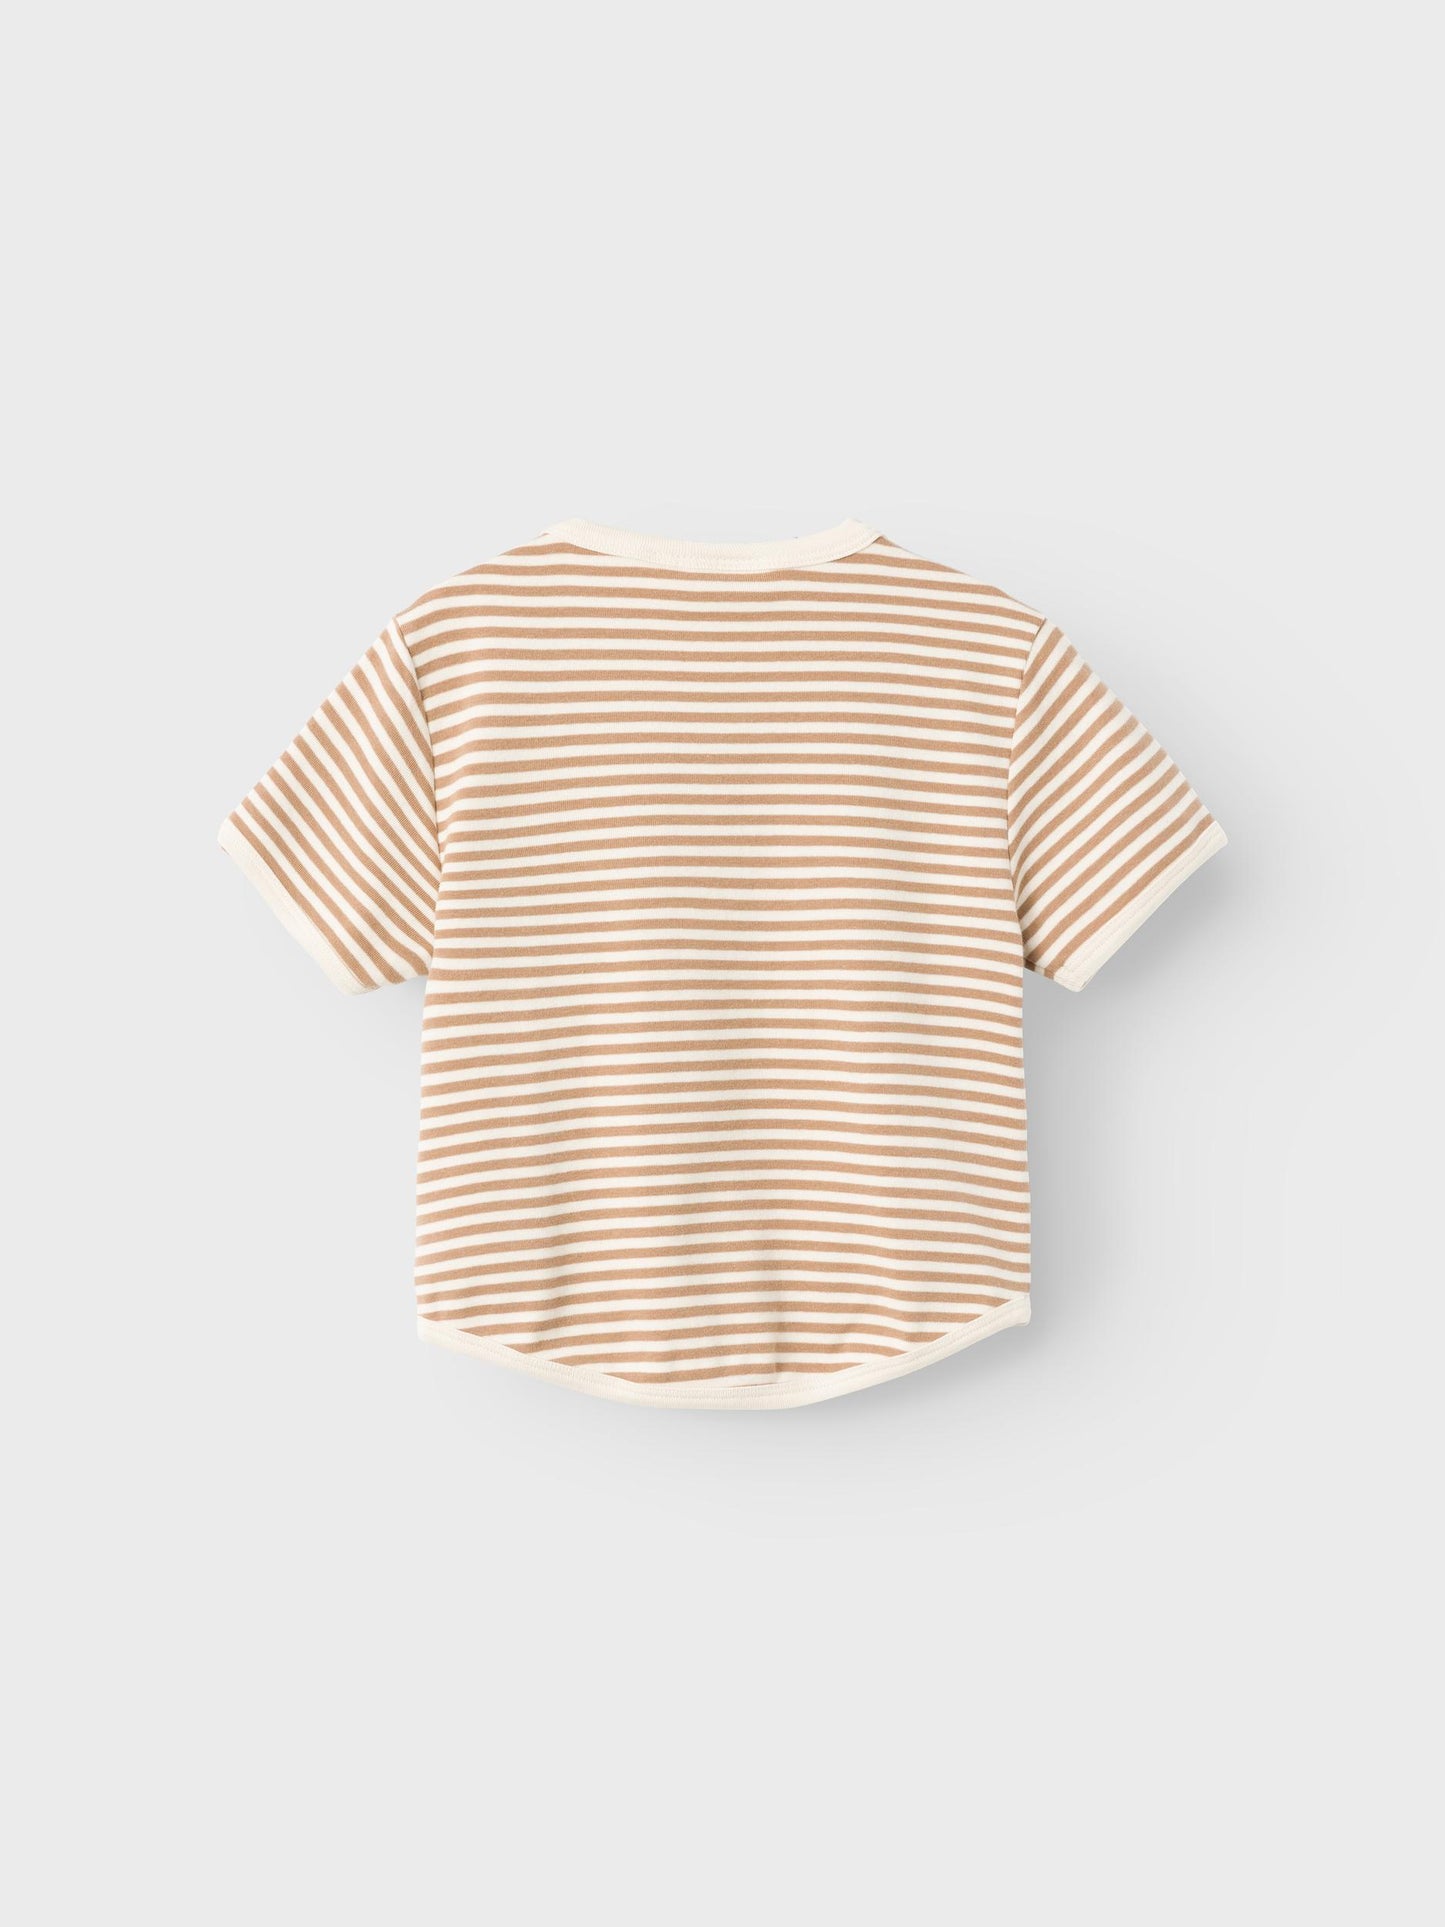 Lil atelier - Loose t-shirt / top - Tigers eye